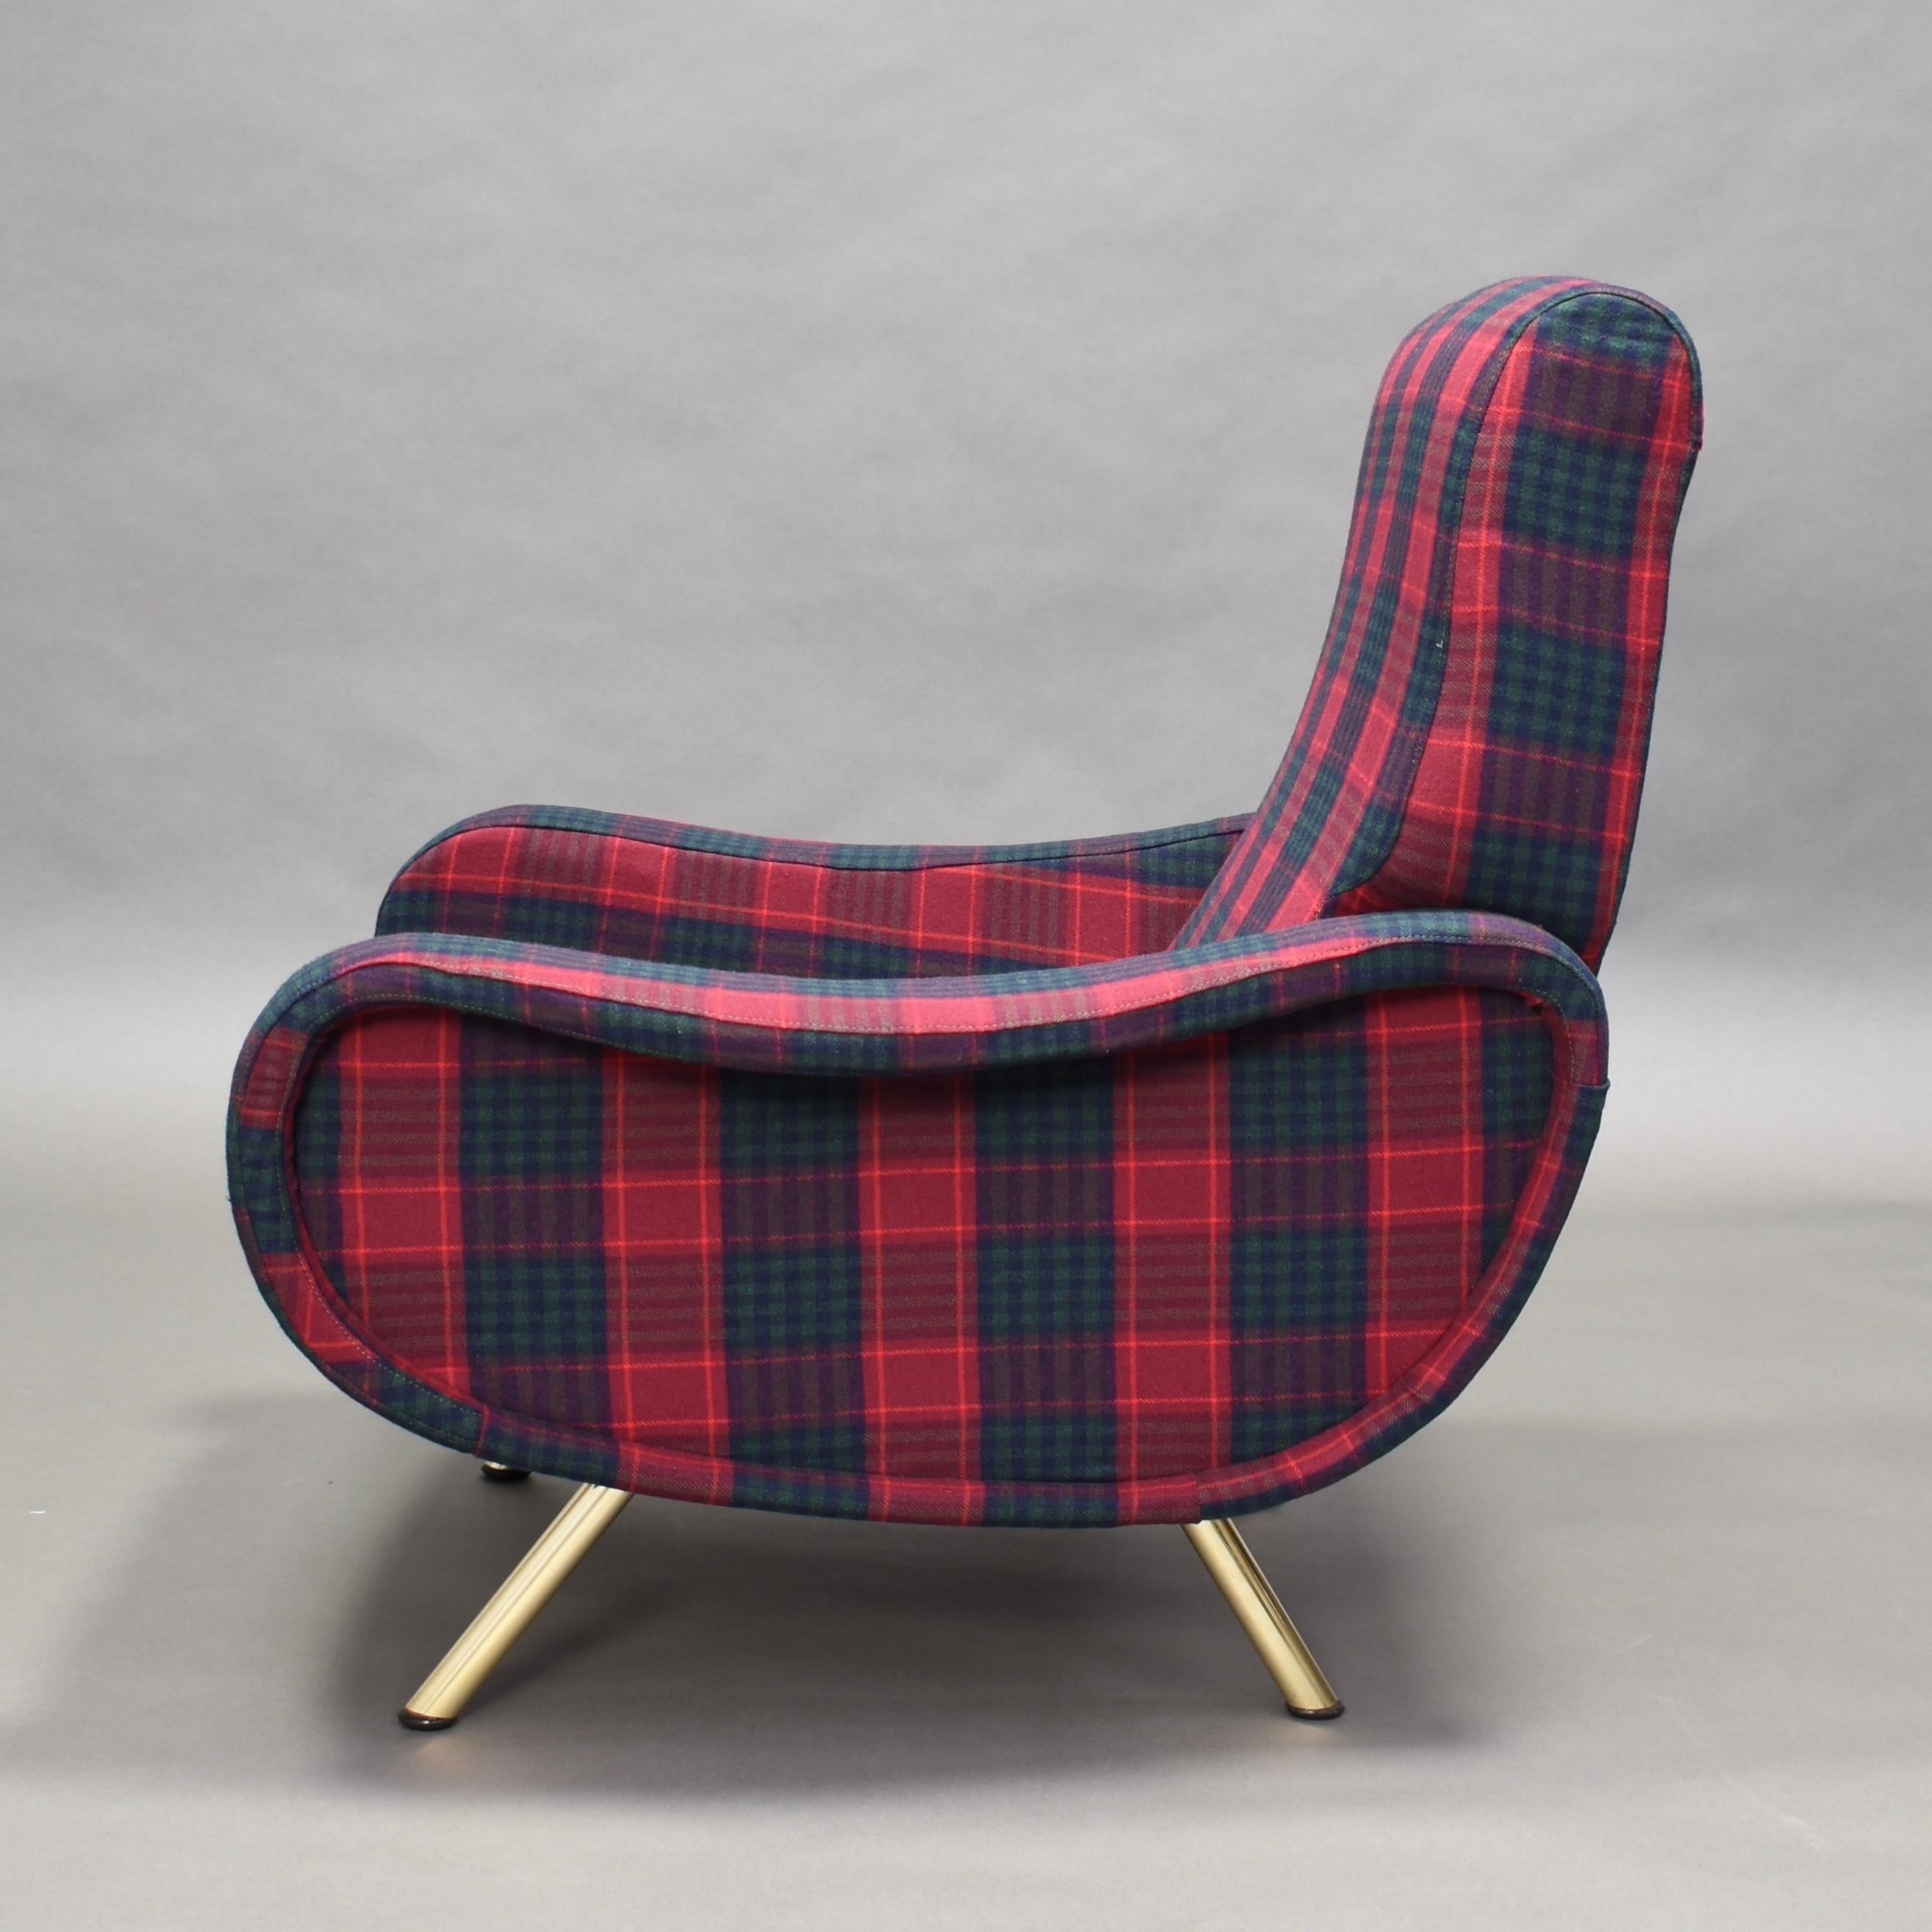 Mid-Century Modern Marco Zanuso 'Lady' Chair by Arflex in New Fabric and Brass, Italy, 1951